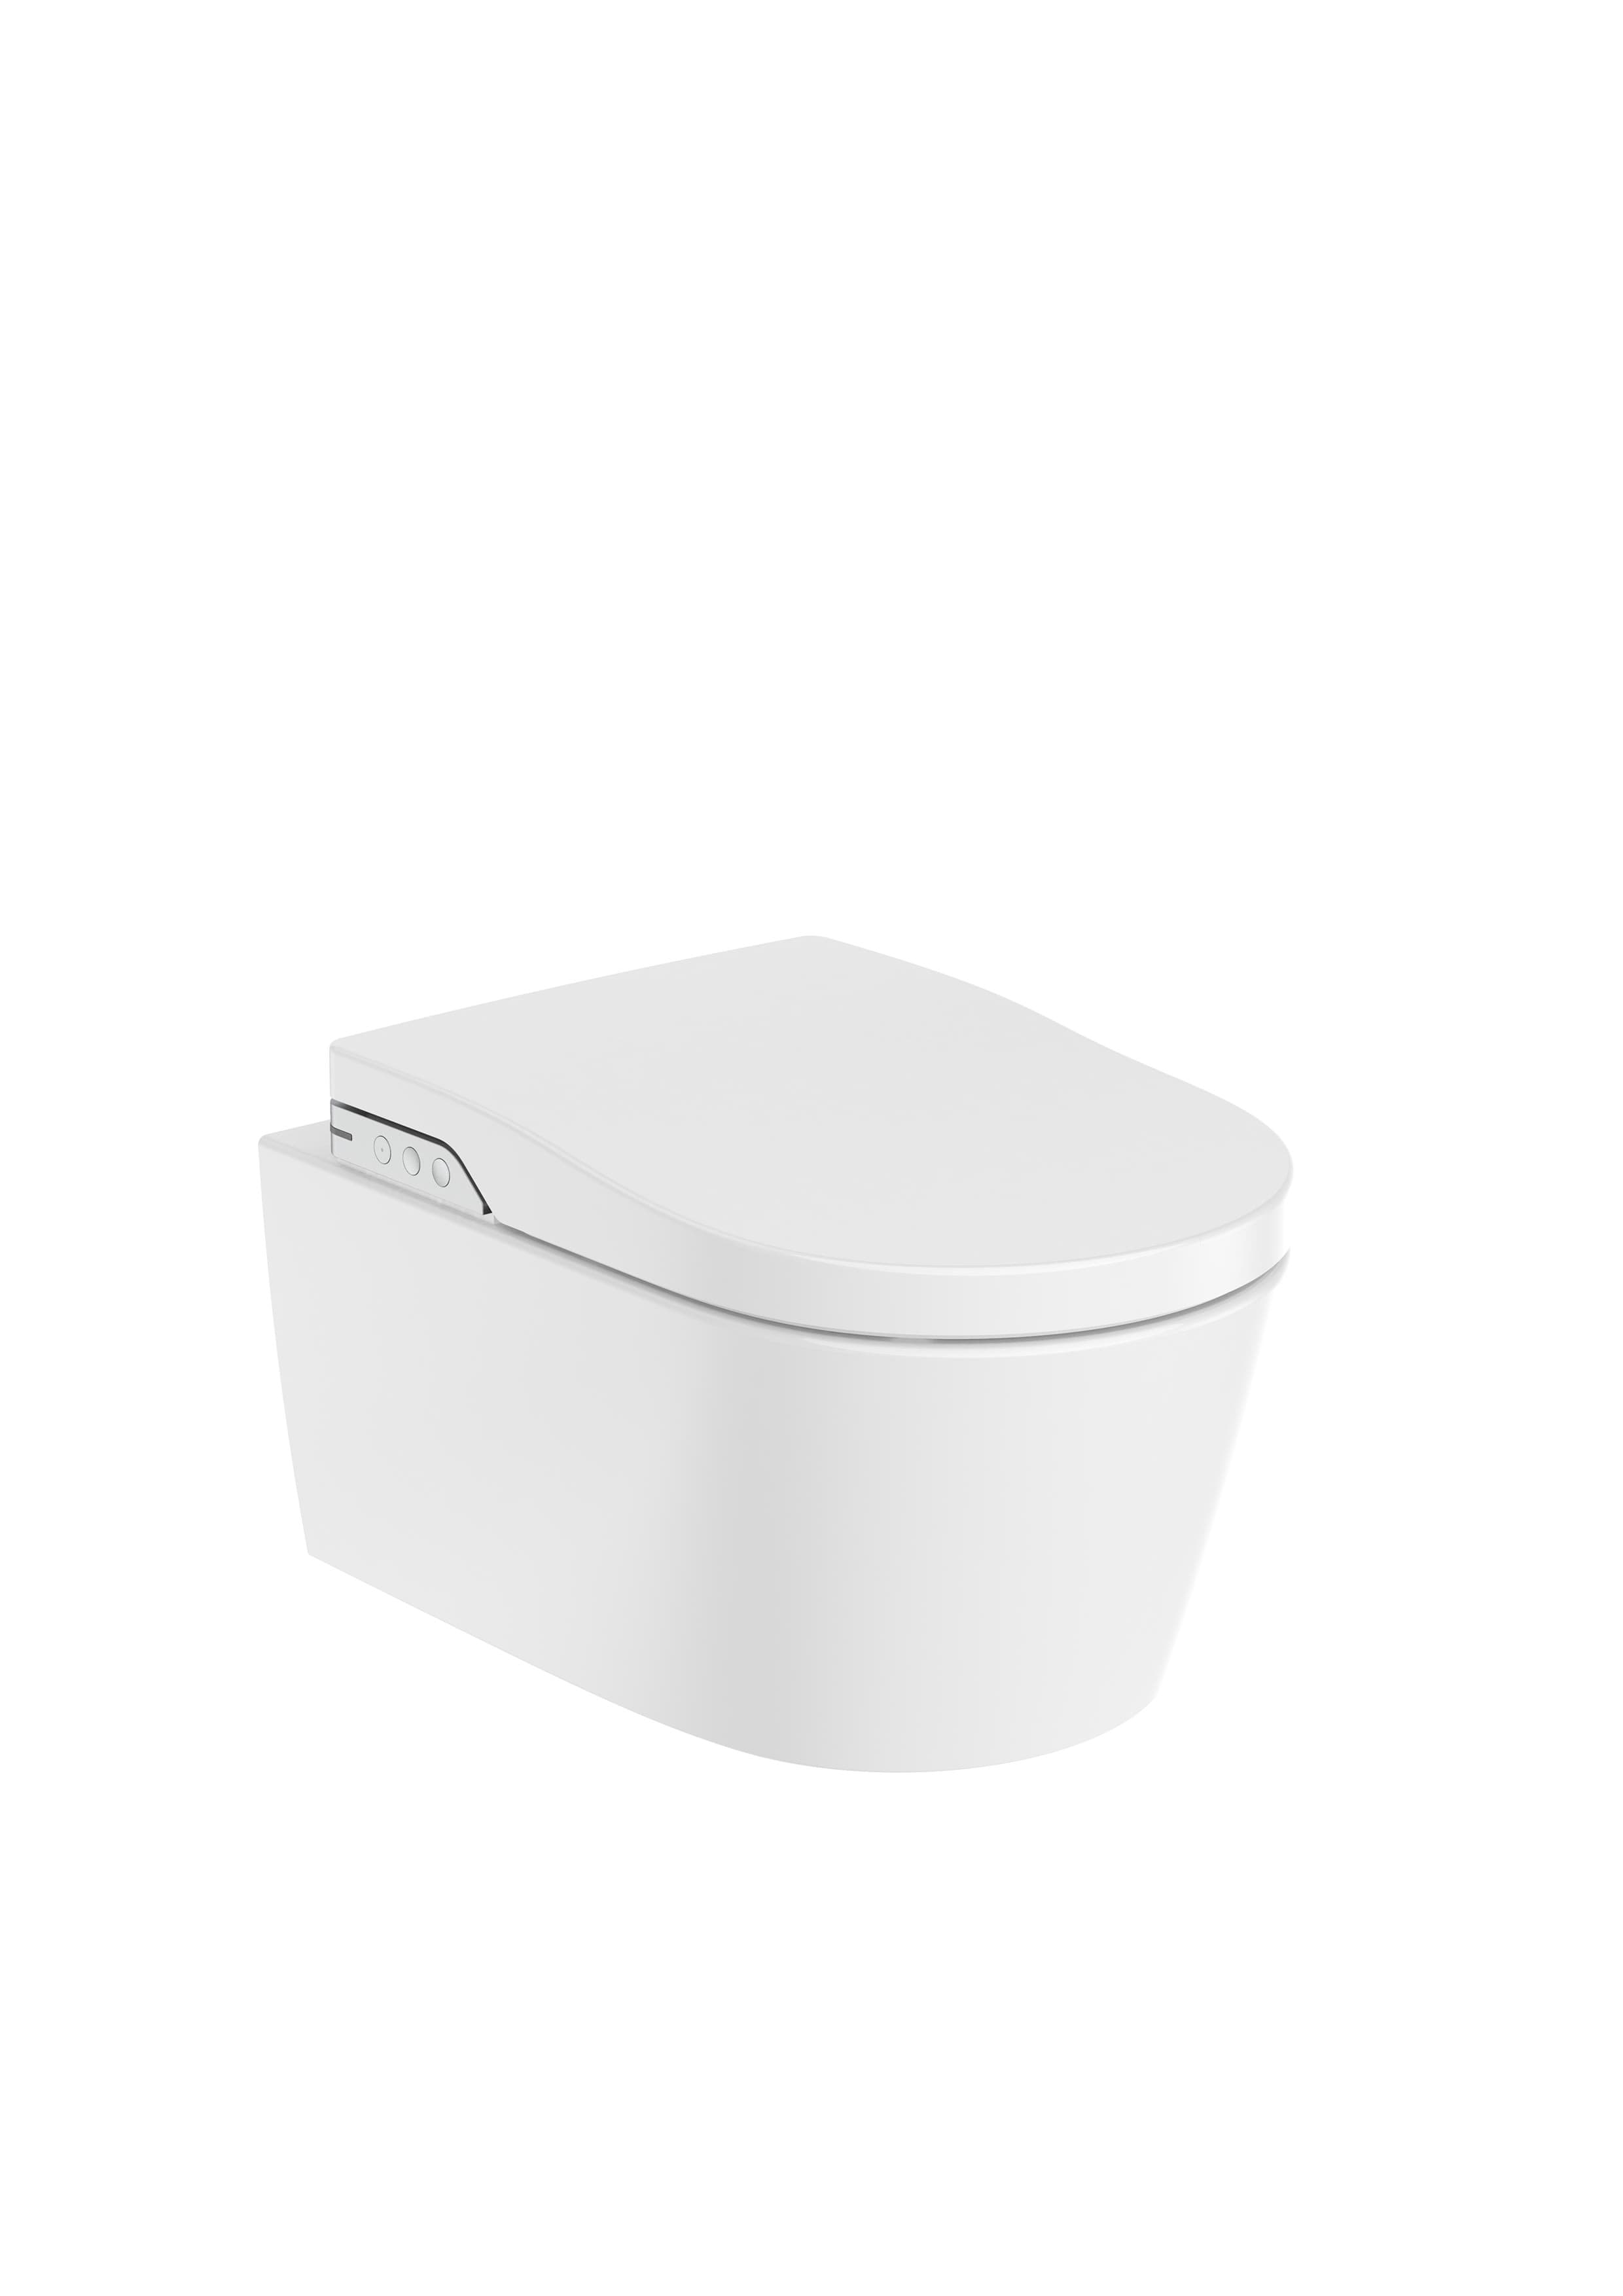 In-Wash® - Vitreous china Rimless wall-hung smart toilet with horizontal outlet. Needs power supply. Roca A803060001